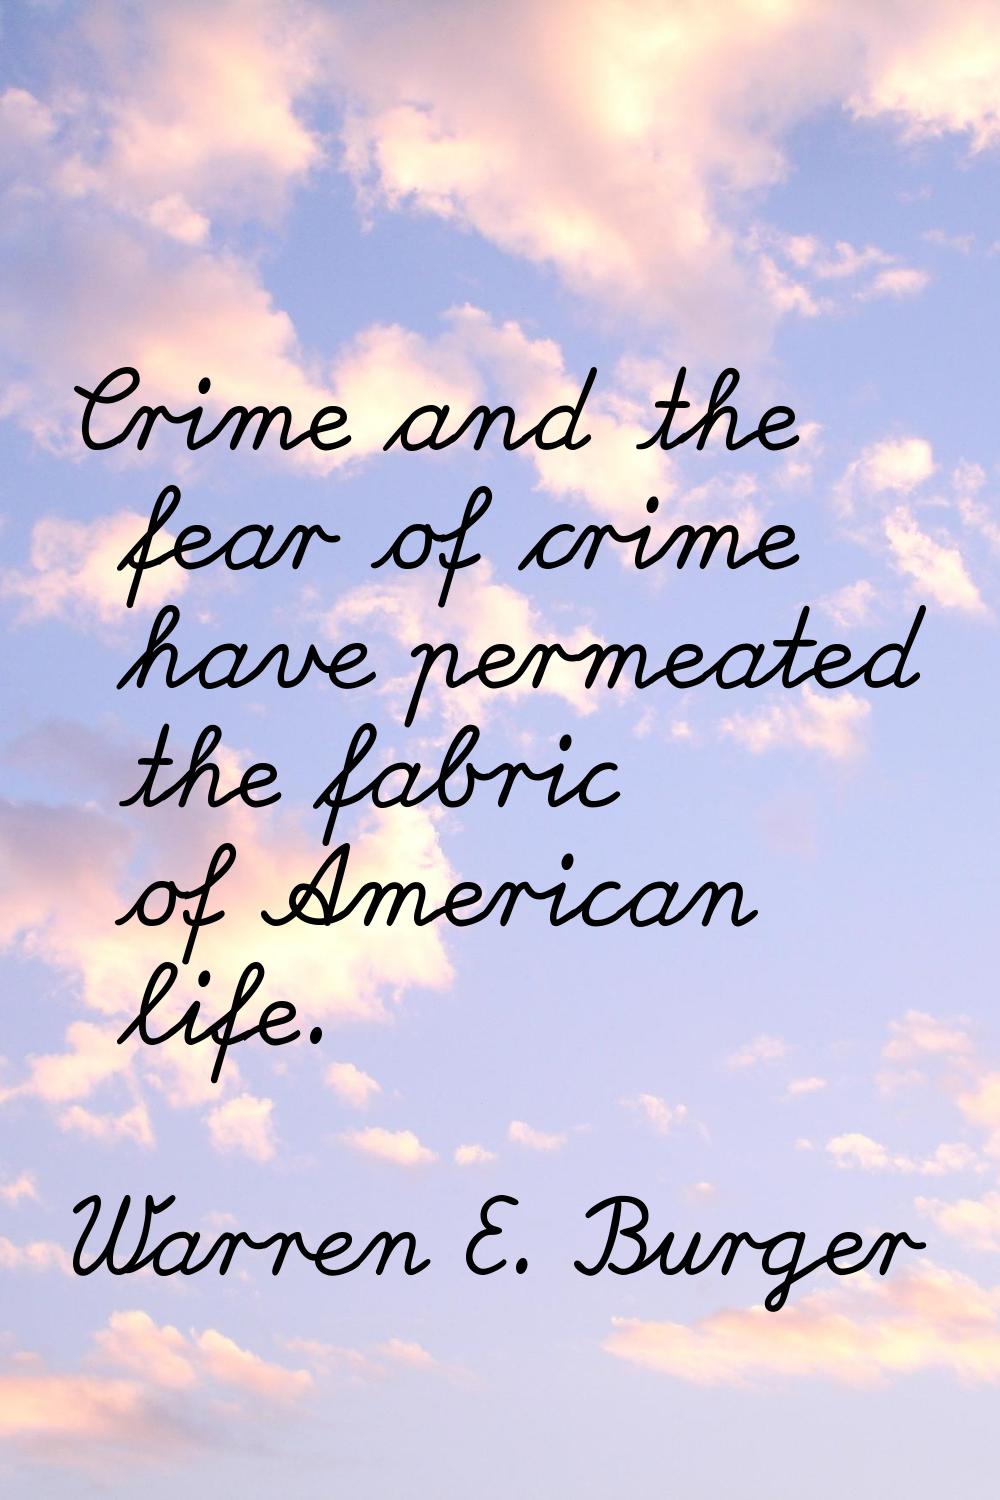 Crime and the fear of crime have permeated the fabric of American life.